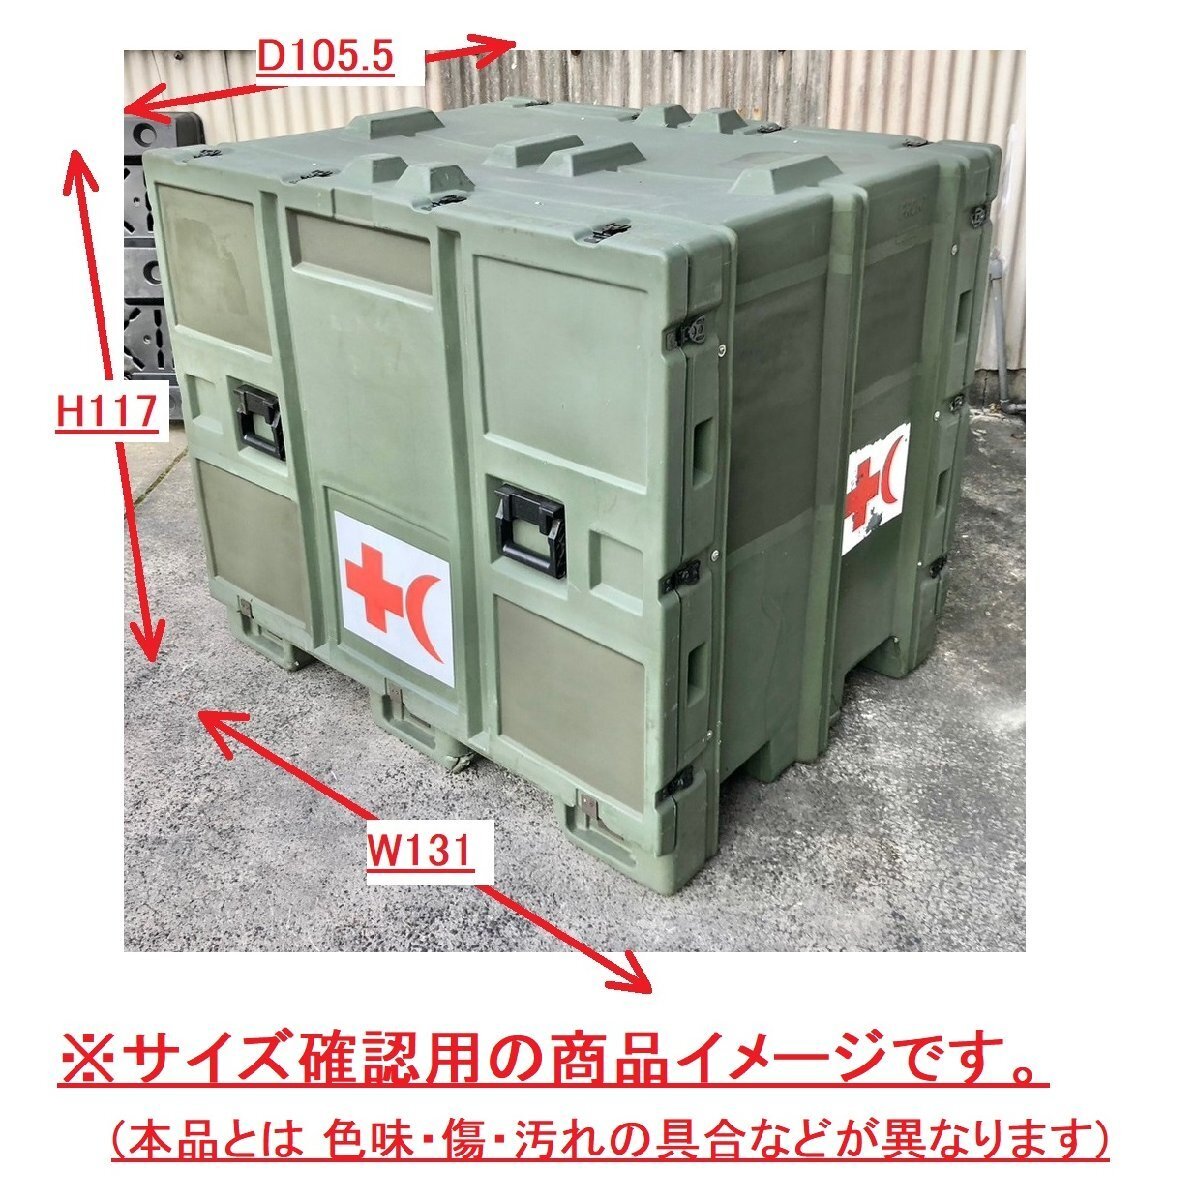  America made HARDIGG Mini container pelican Hardy gMobileMaster8 moveable shelves board toolbox military Setagaya base the US armed forces discharge (E)BD11NM#24